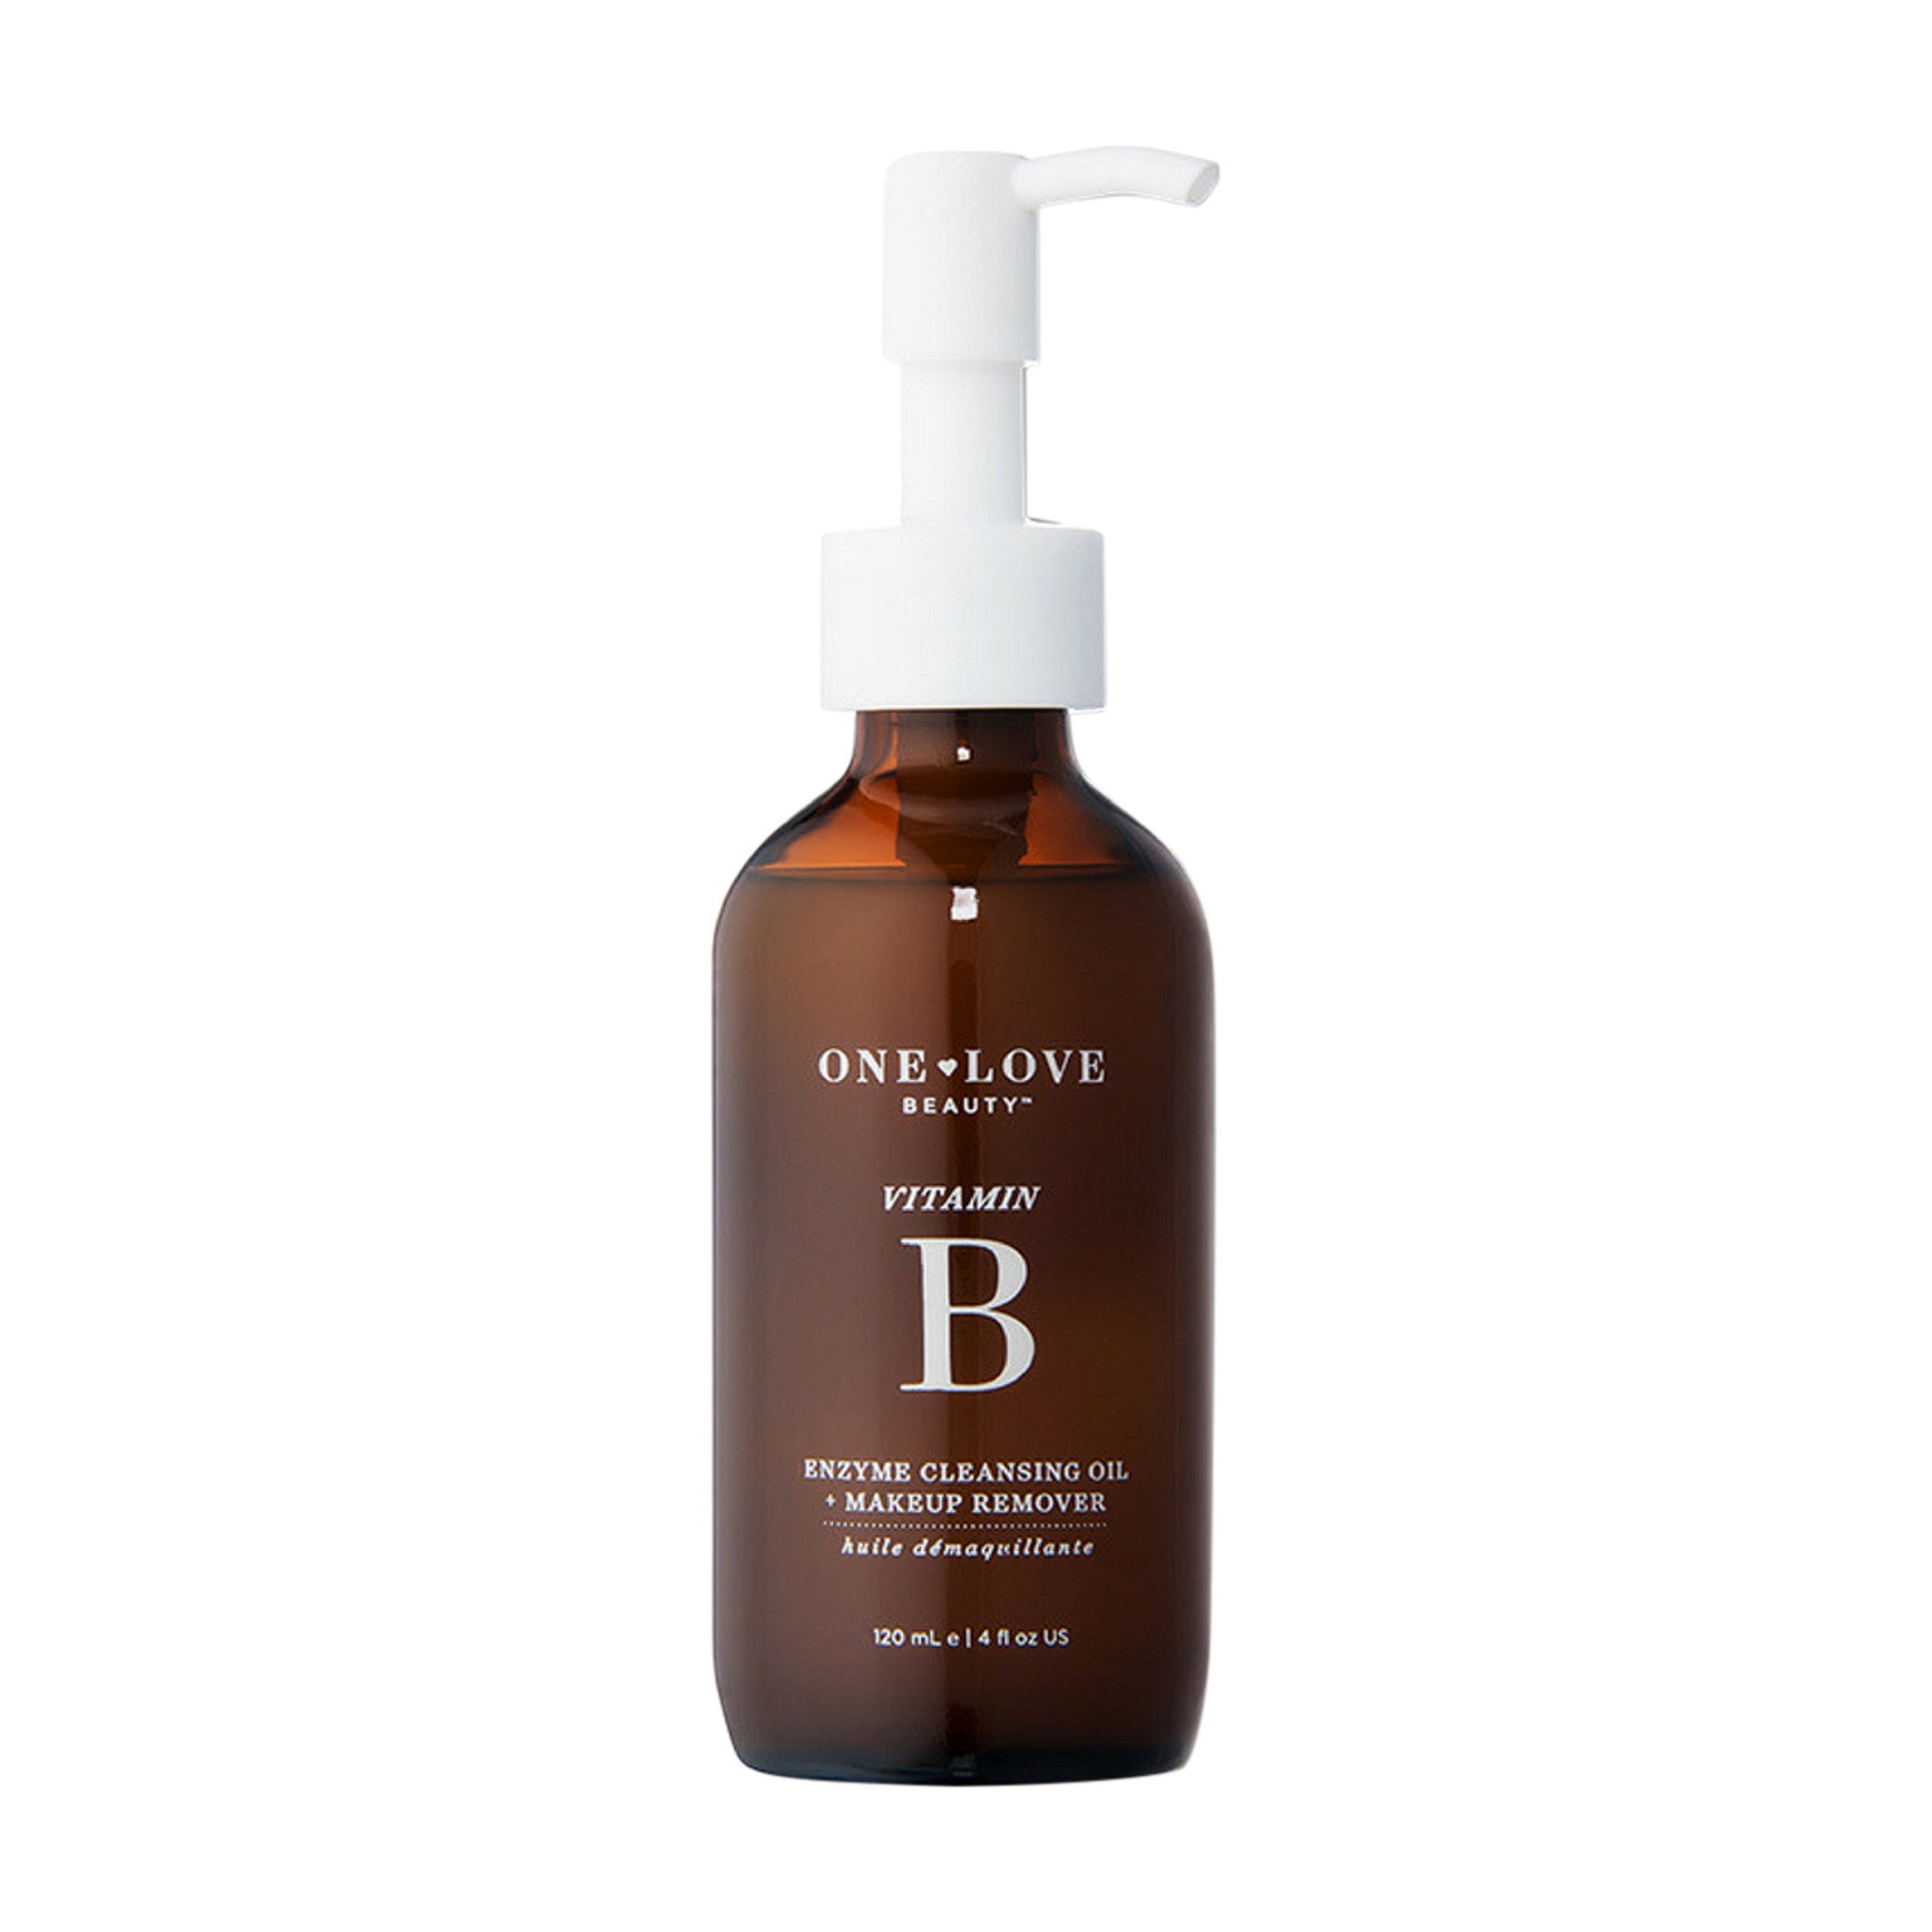 Botanical B Enzyme Cleansing Oil main image.